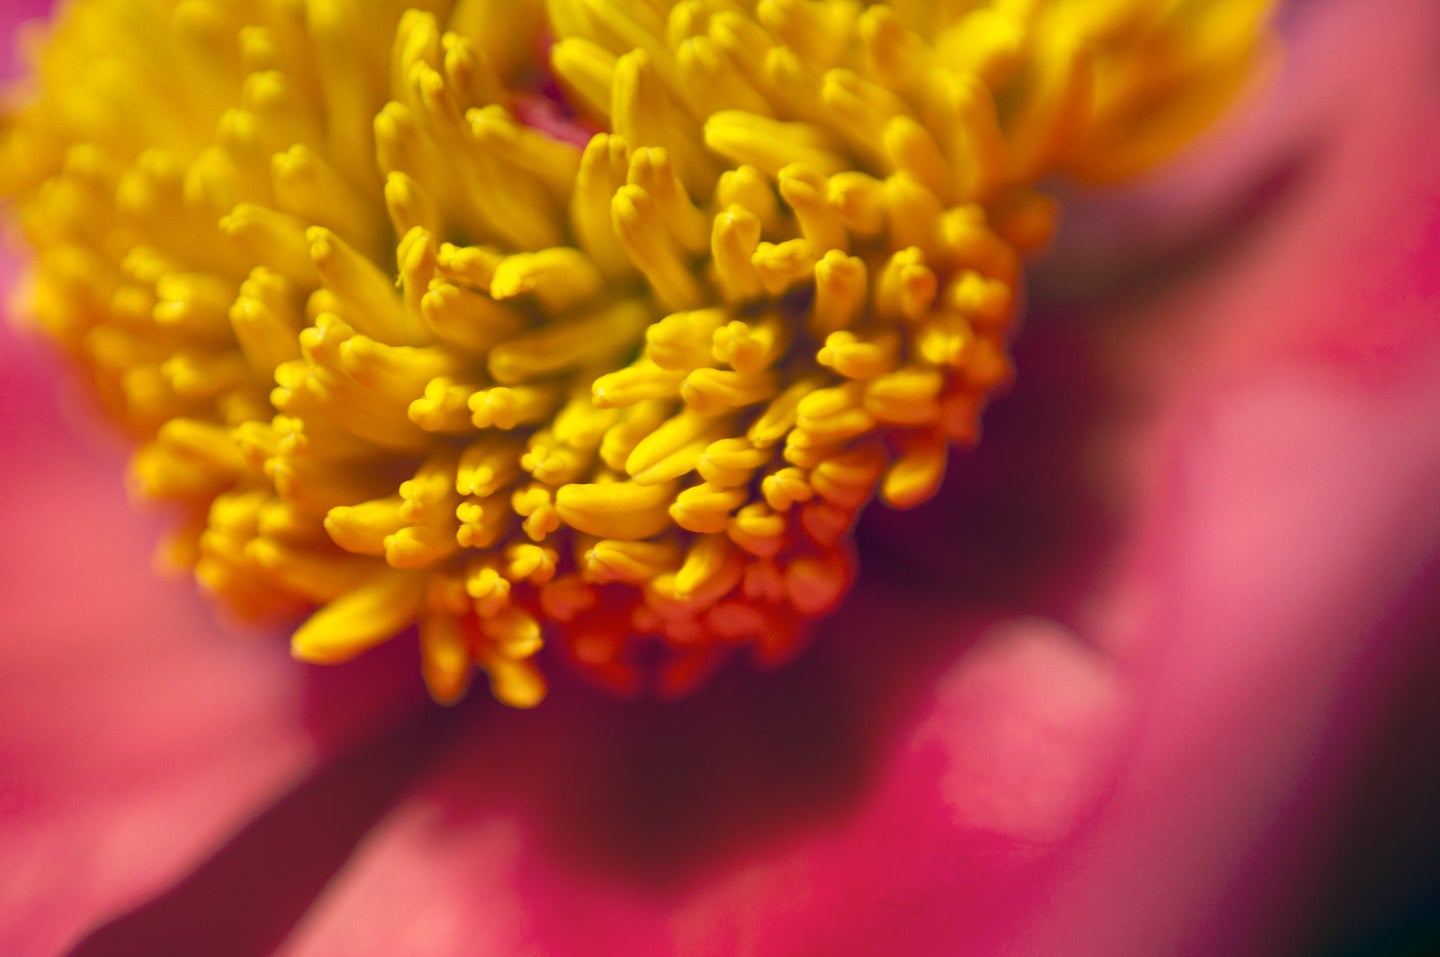 maco close up shot of a pink flower with yellow pollen